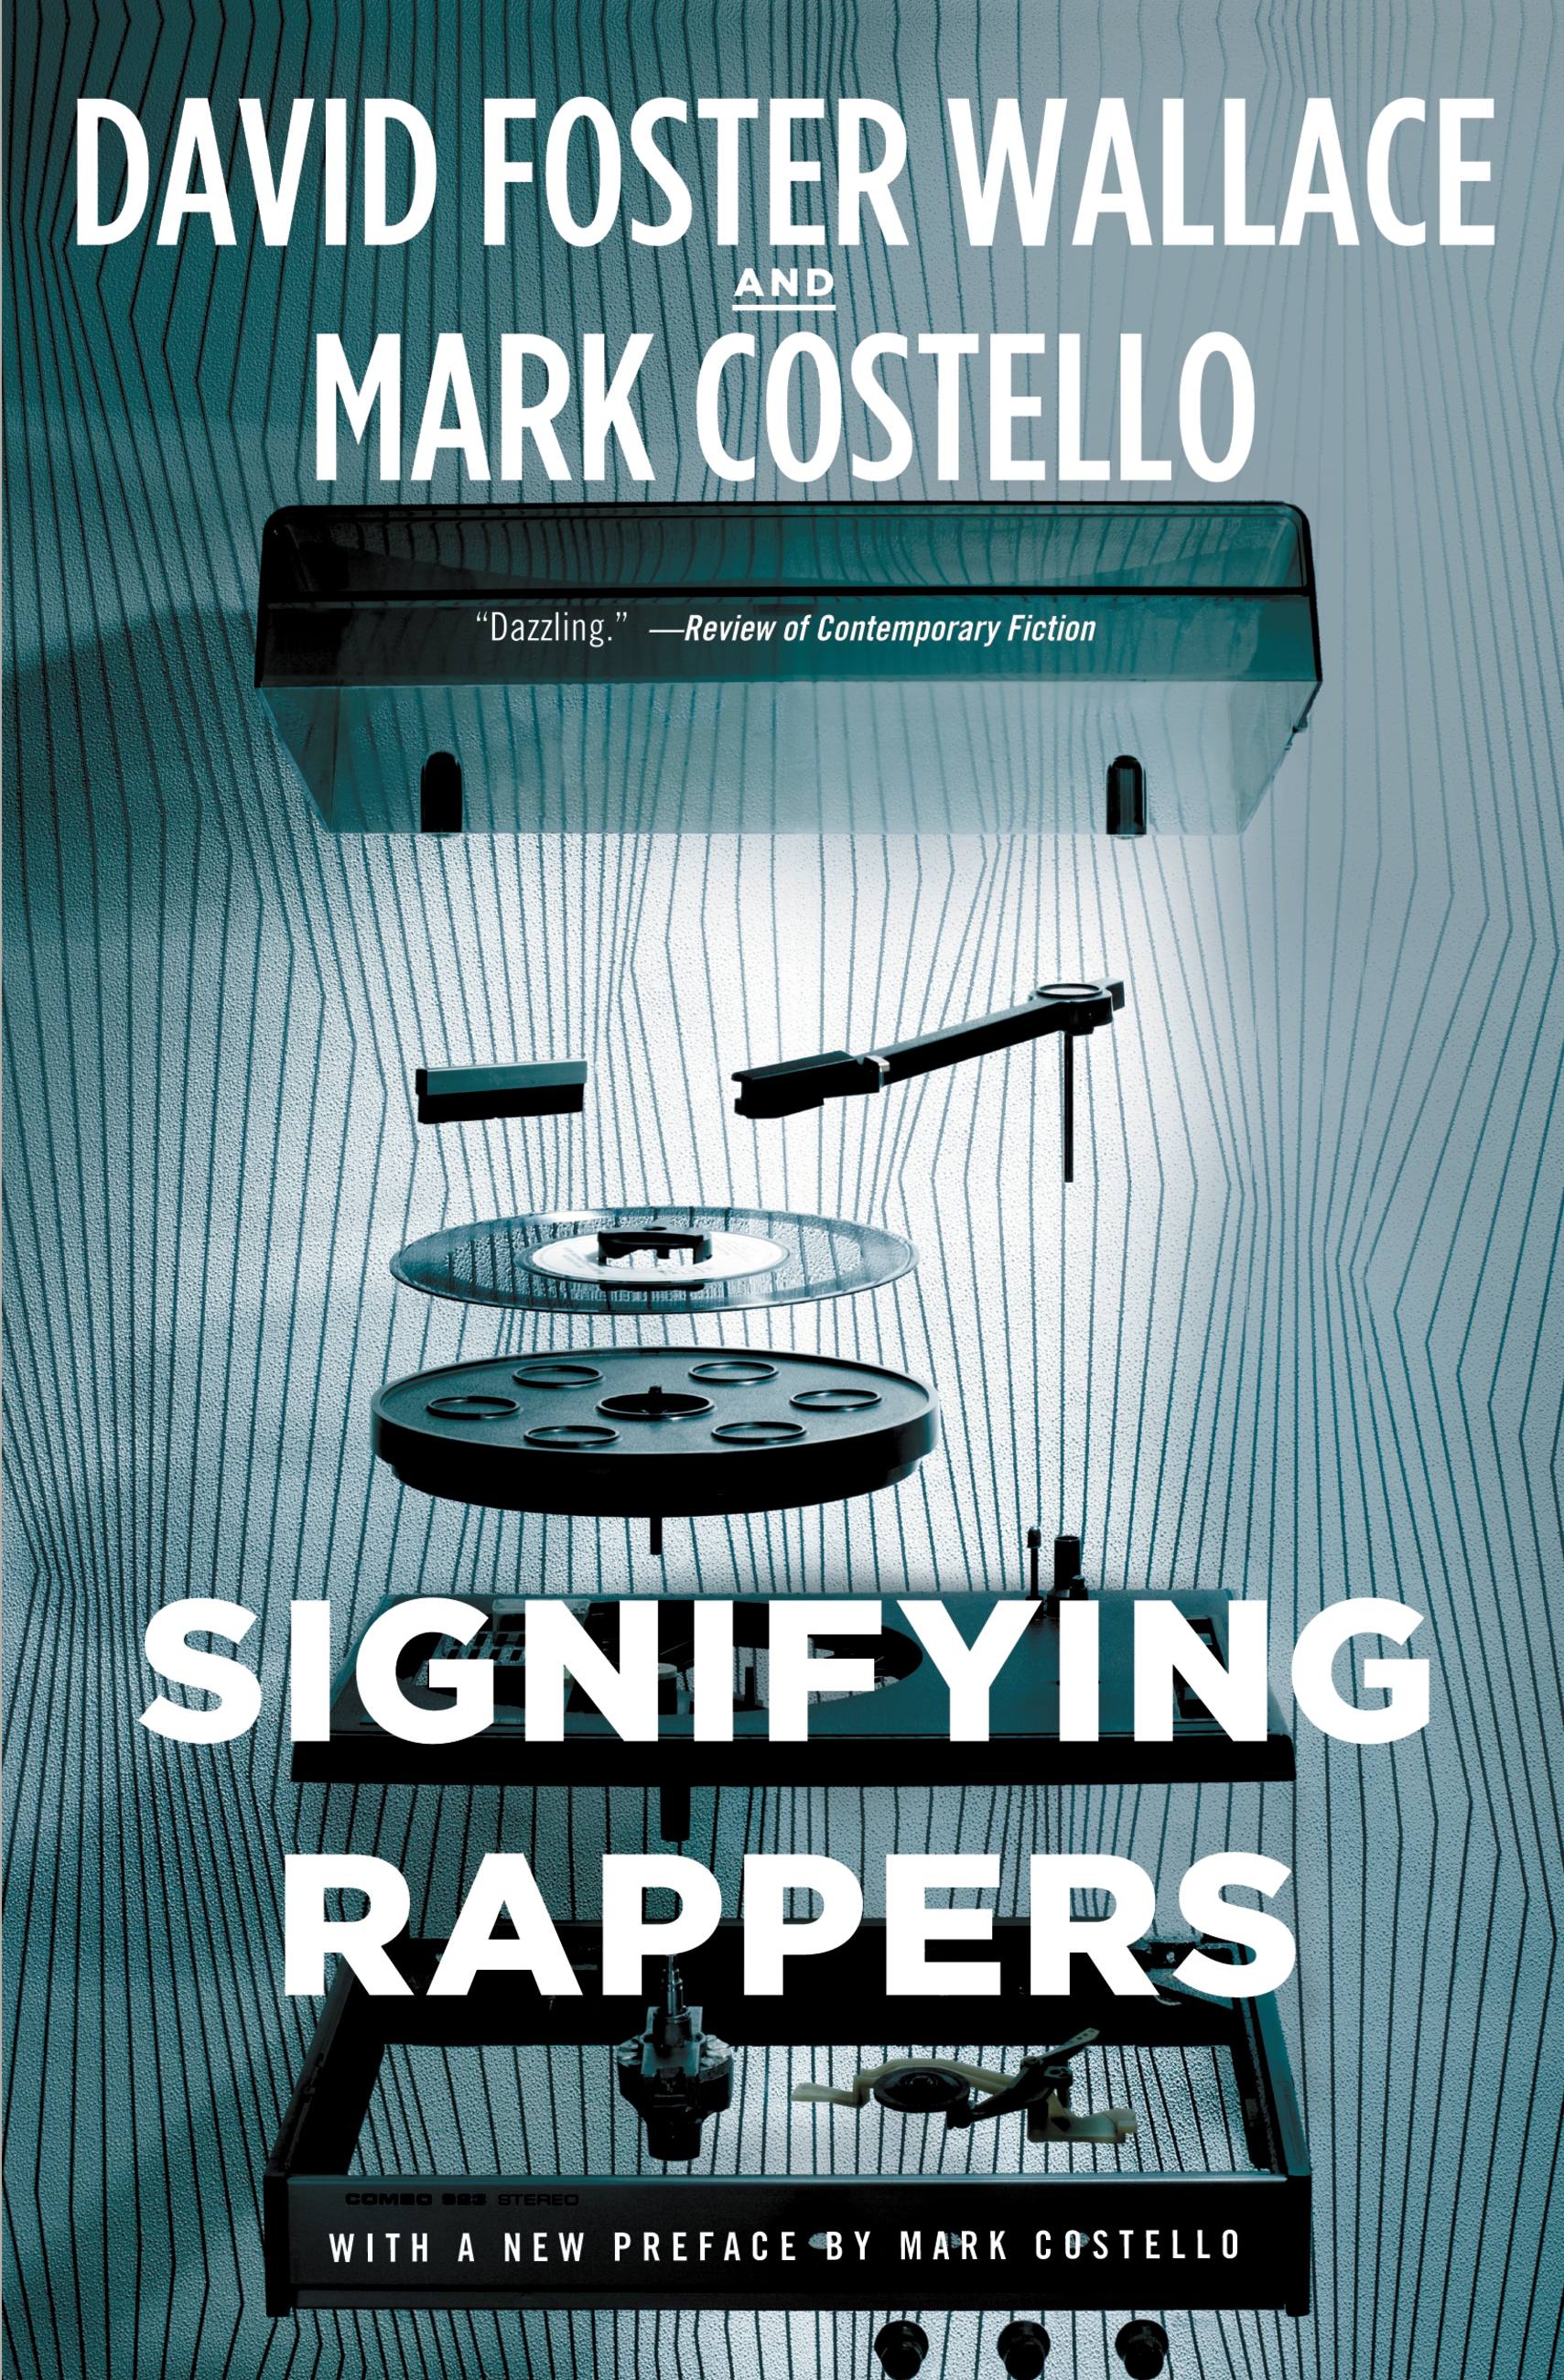 Vergin Rape Sex Gang Bang - Signifying Rappers by David Foster Wallace | Hachette Book Group